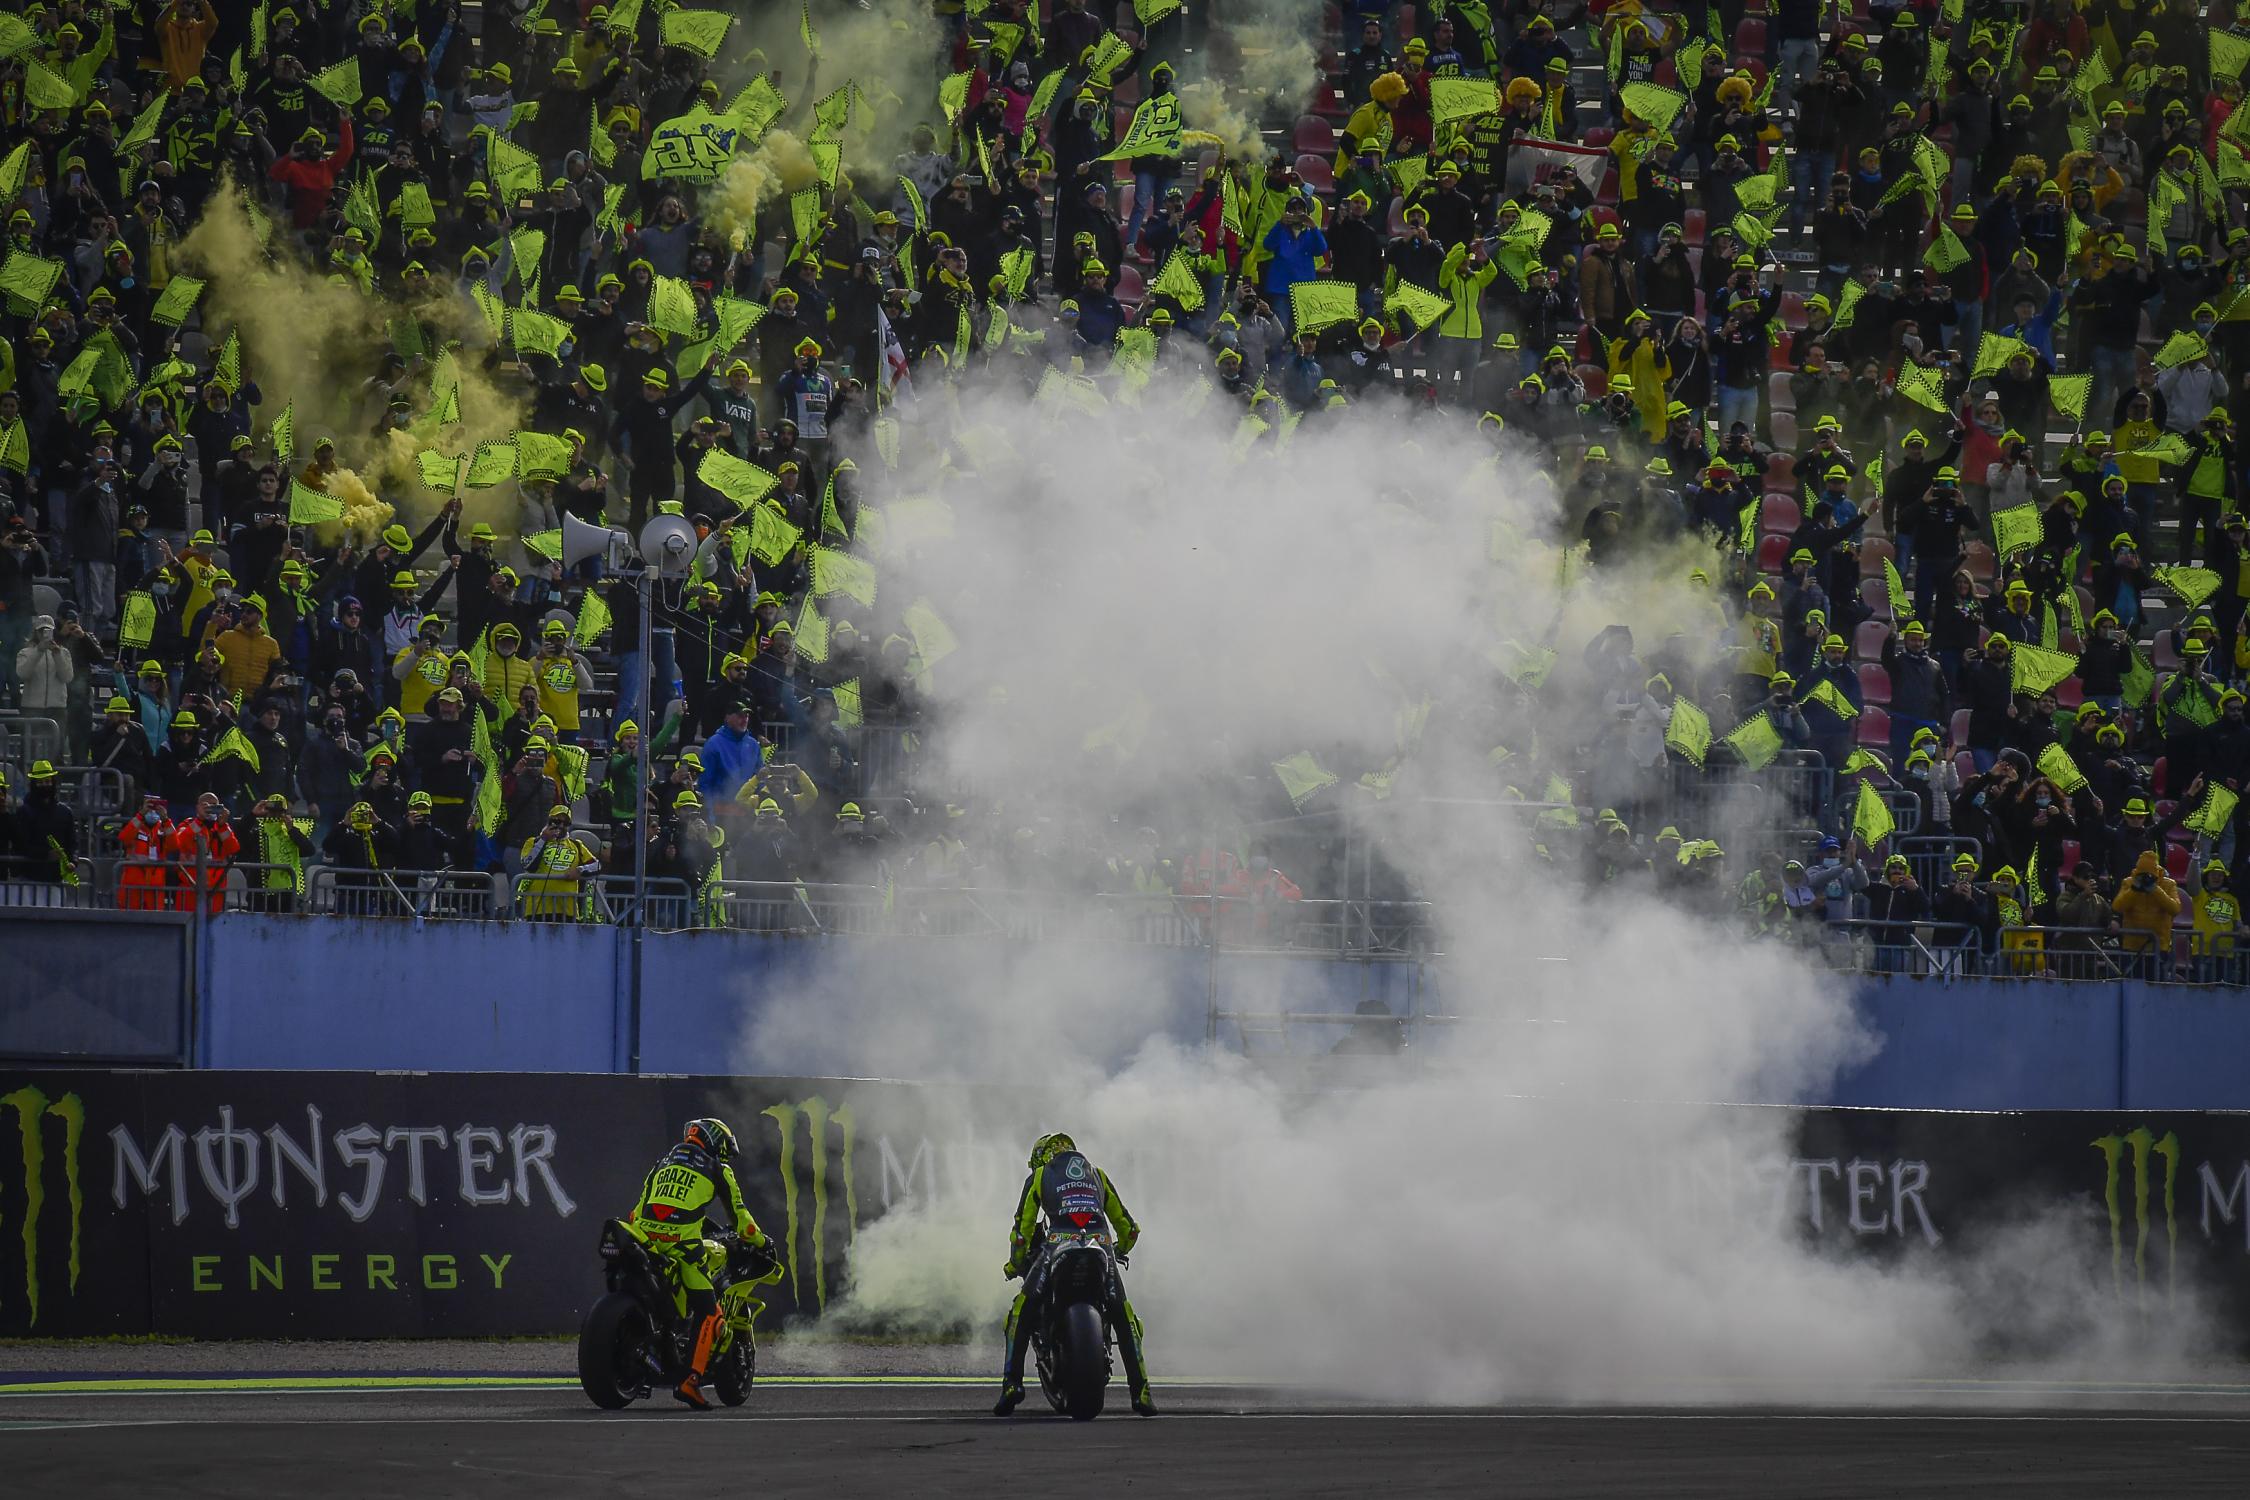 A shot of Rossi in front of his fans